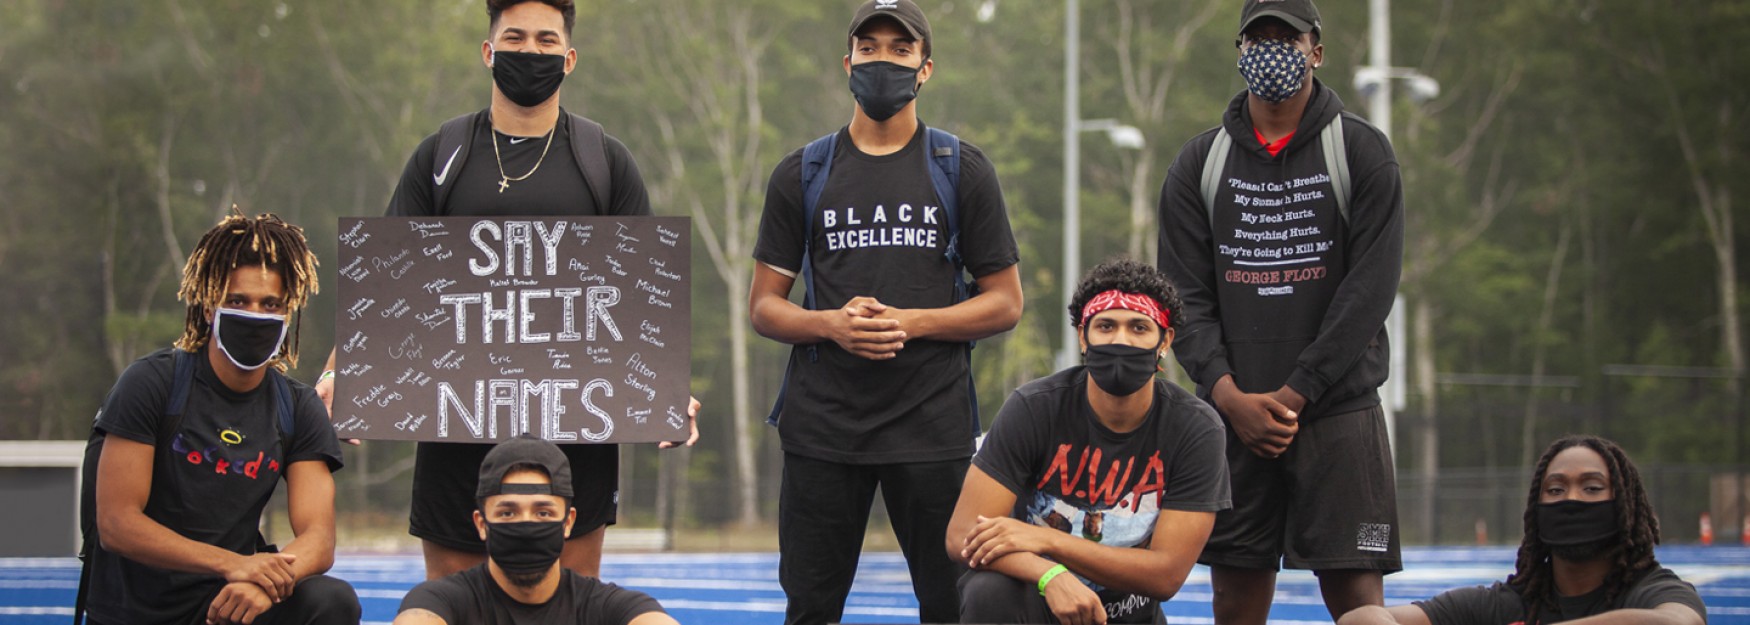 Members of the U N E football team wear black clothing and pose for a photo at the Black Lives Matter march on the Biddeford campus